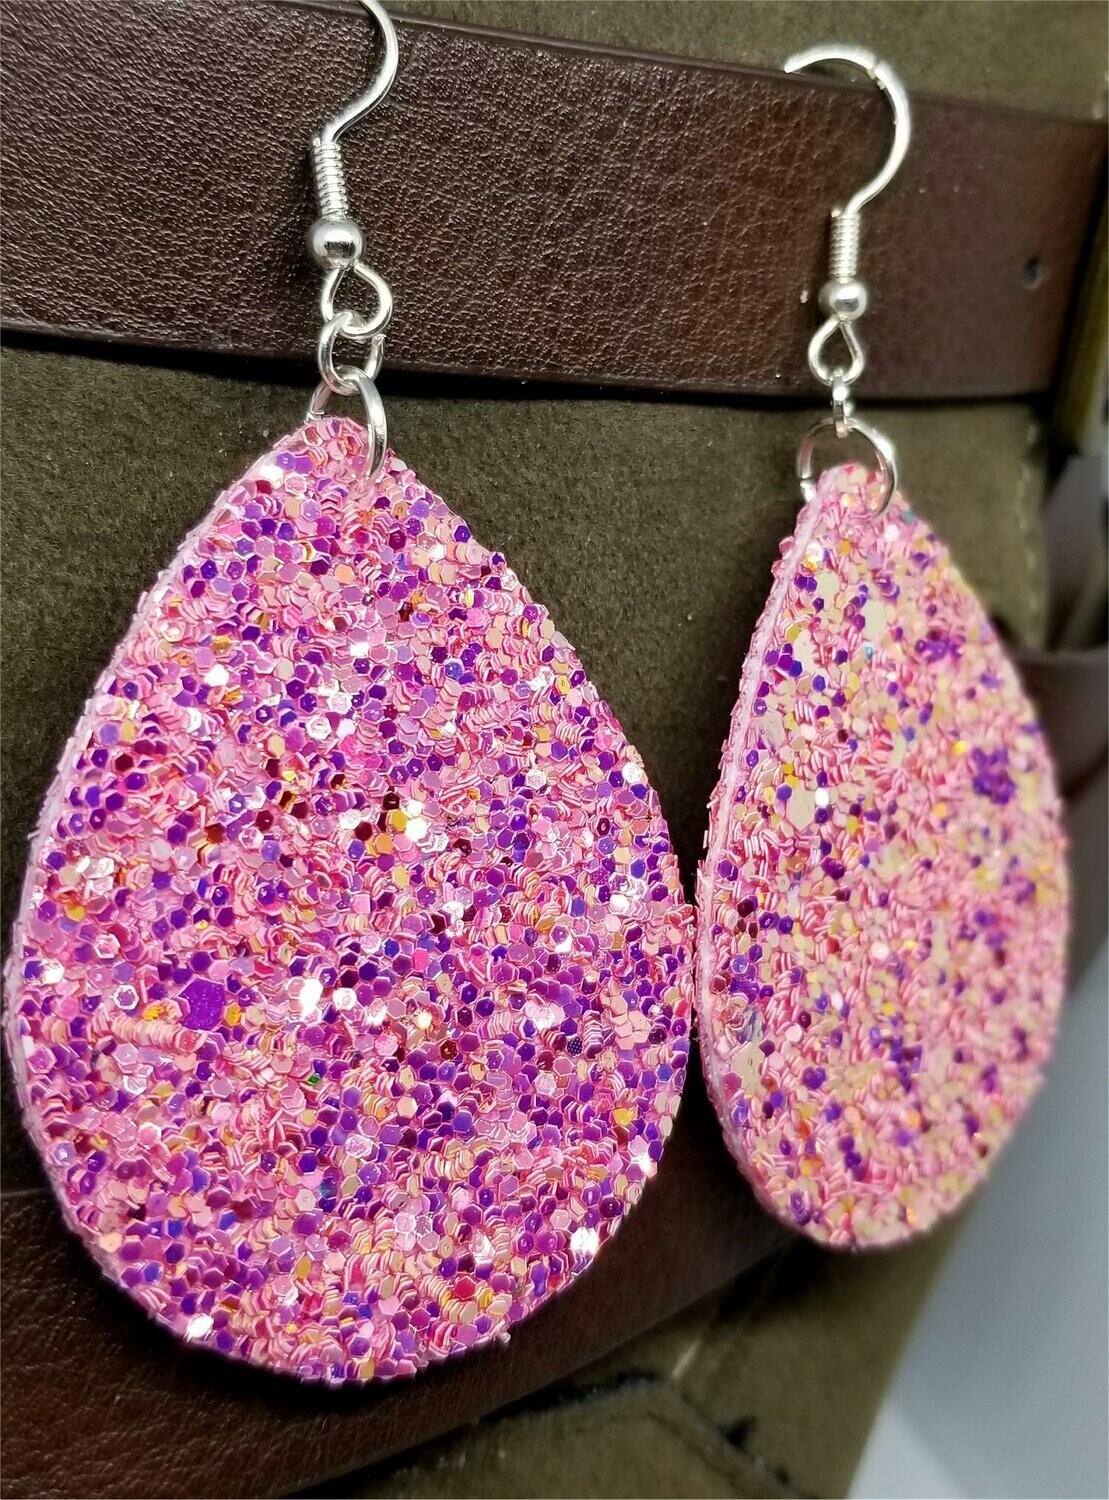 Pink Coral Color Shifting Glitter Very Sparkly Double Sided FAUX Leather Teardrop Earrings